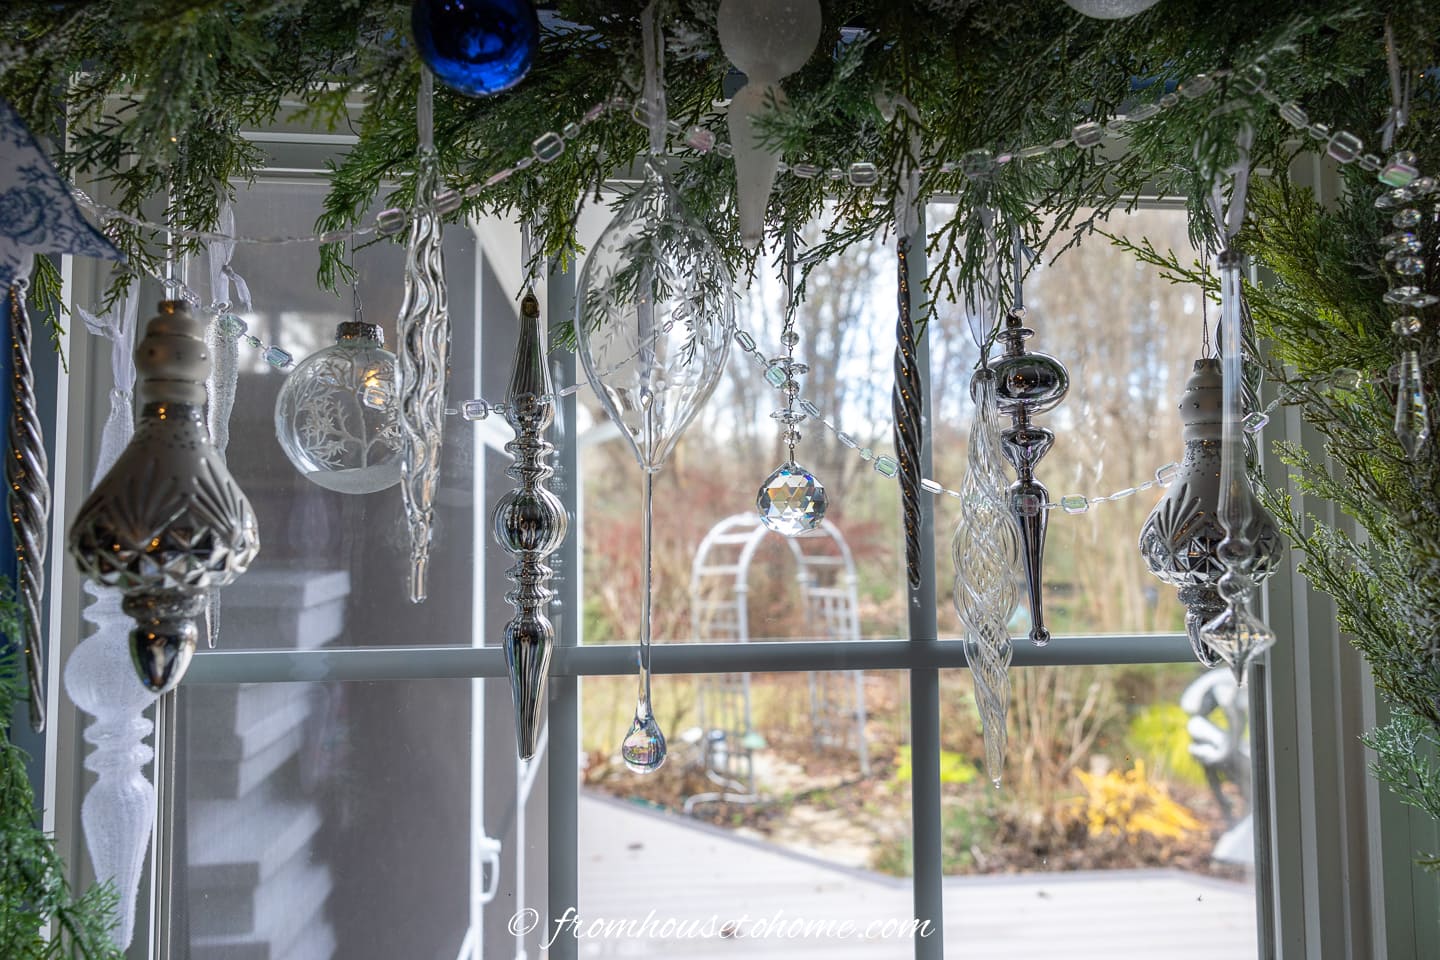 Clear glass, white and silver finial ornaments hung from a garland over a window